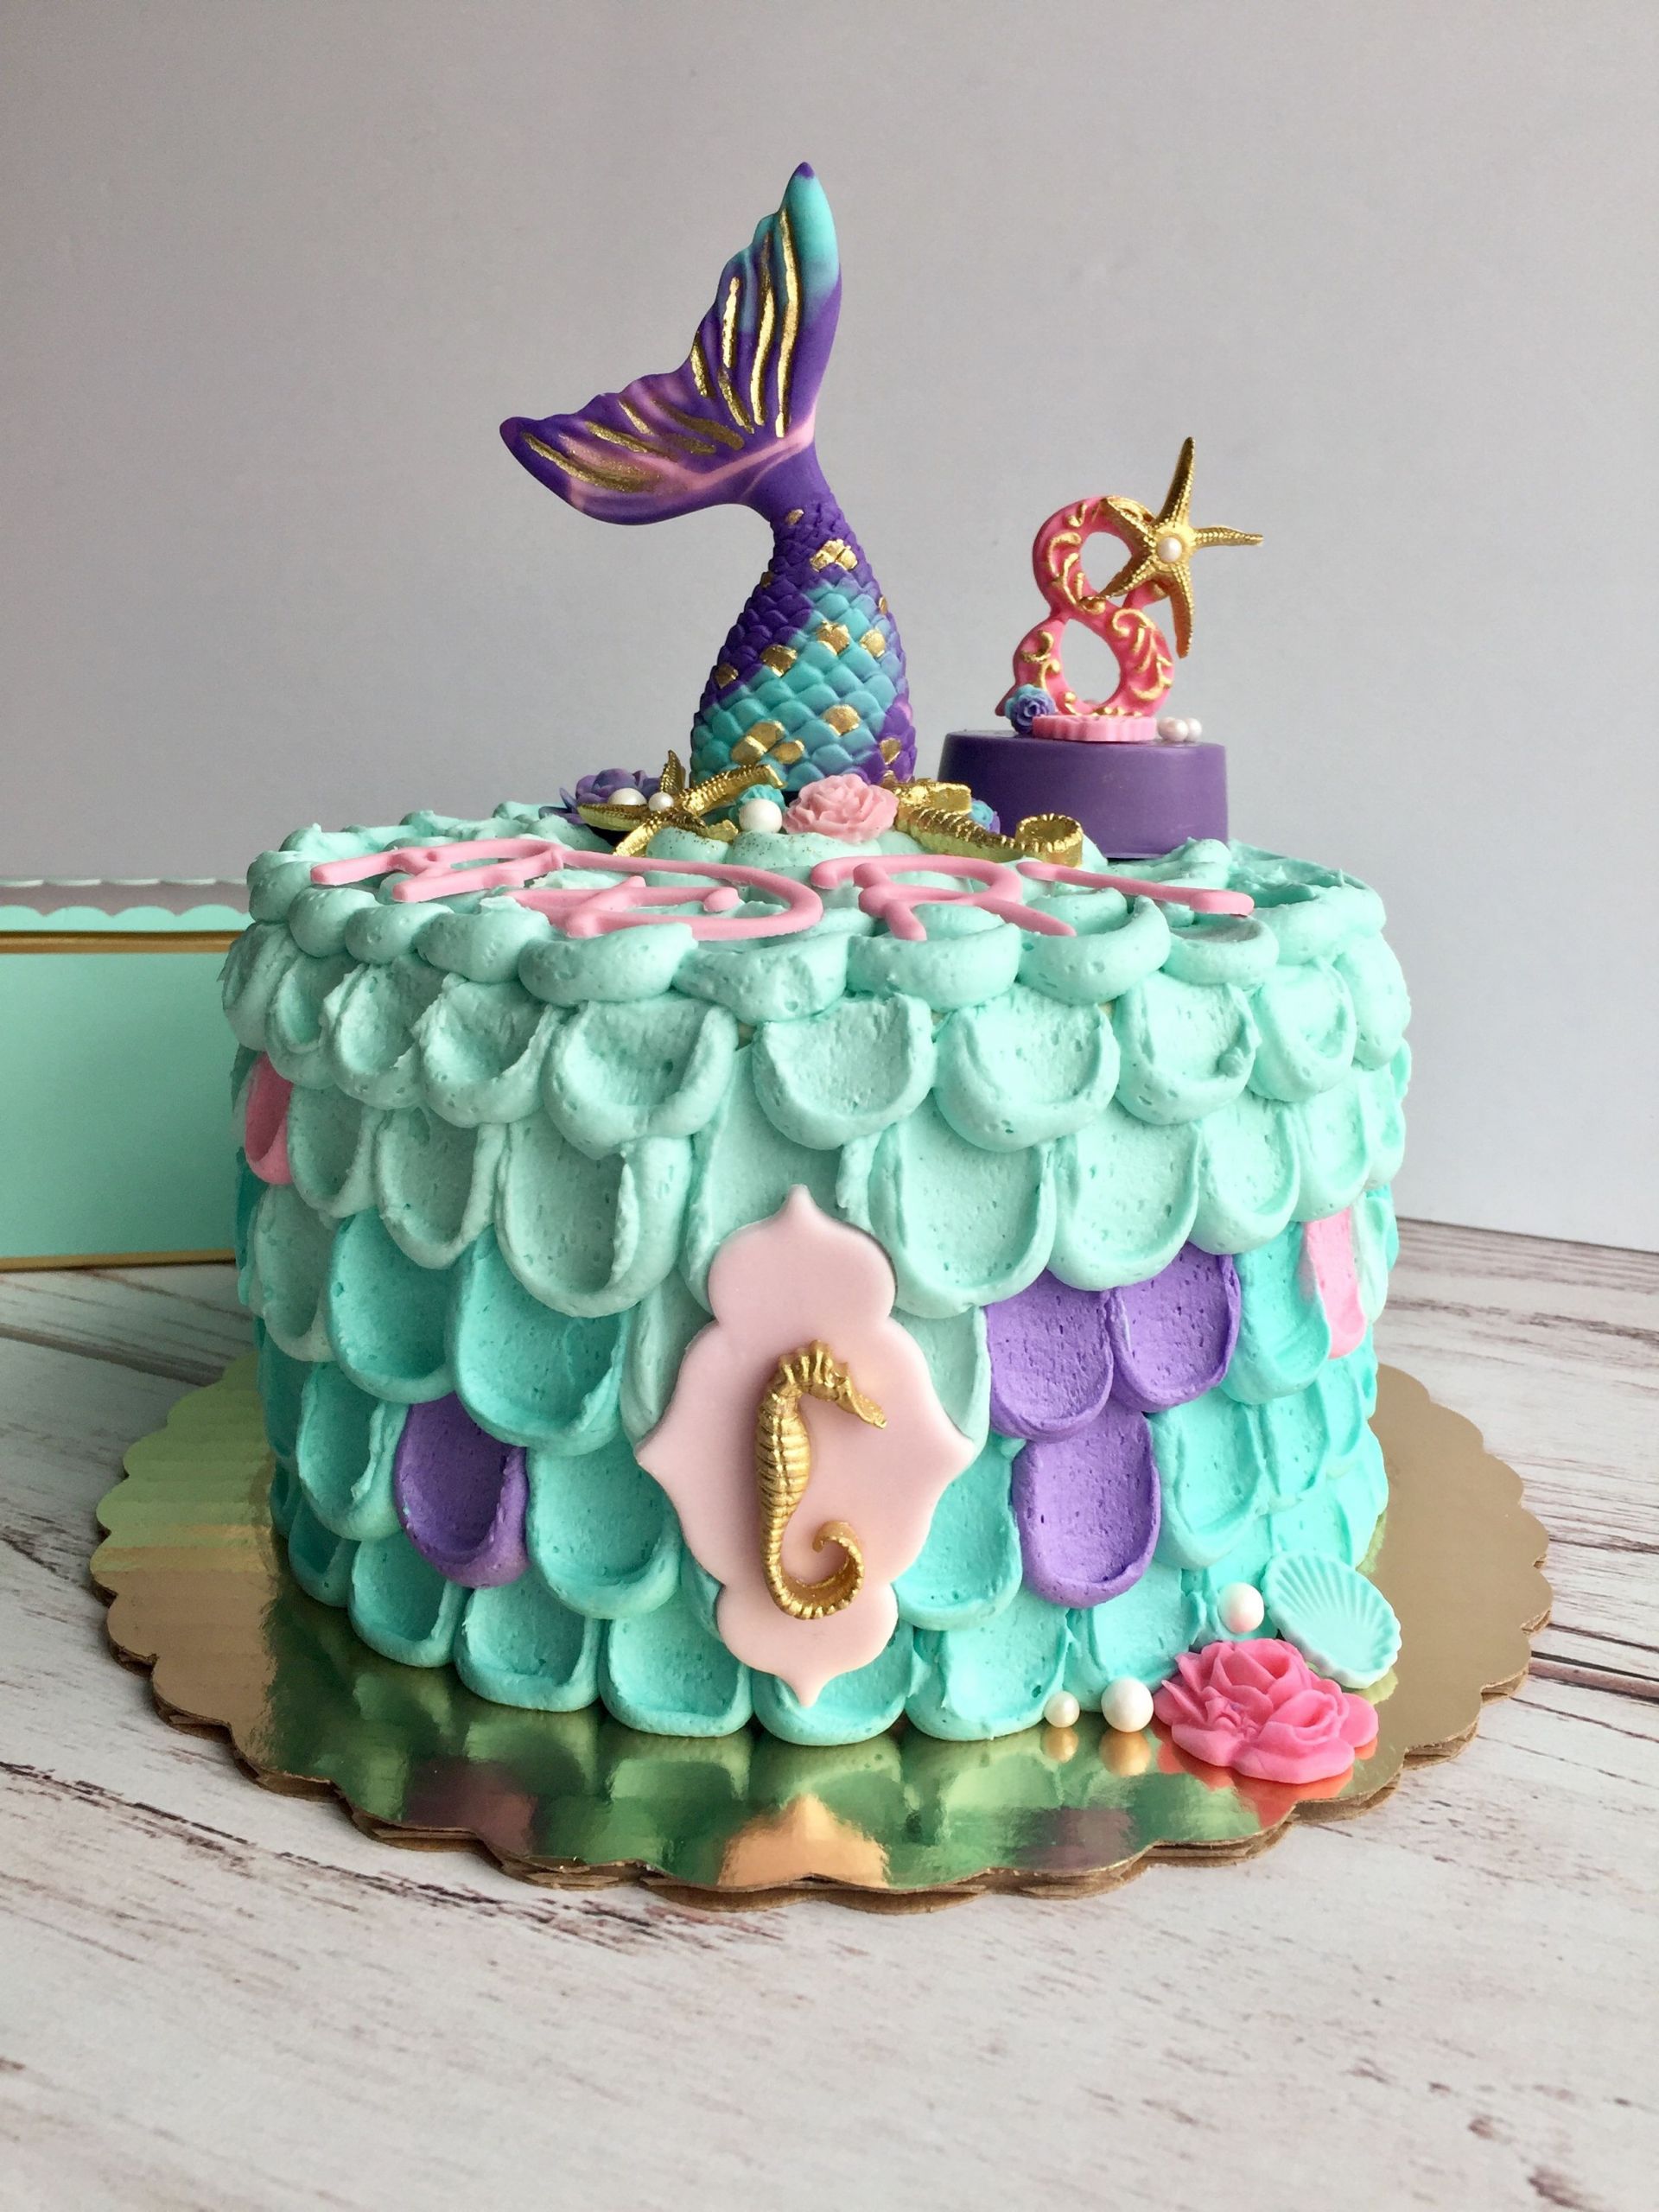 Birthday Party Ideas For 8 Year Old Girl
 Mermaid cake for 8 year old